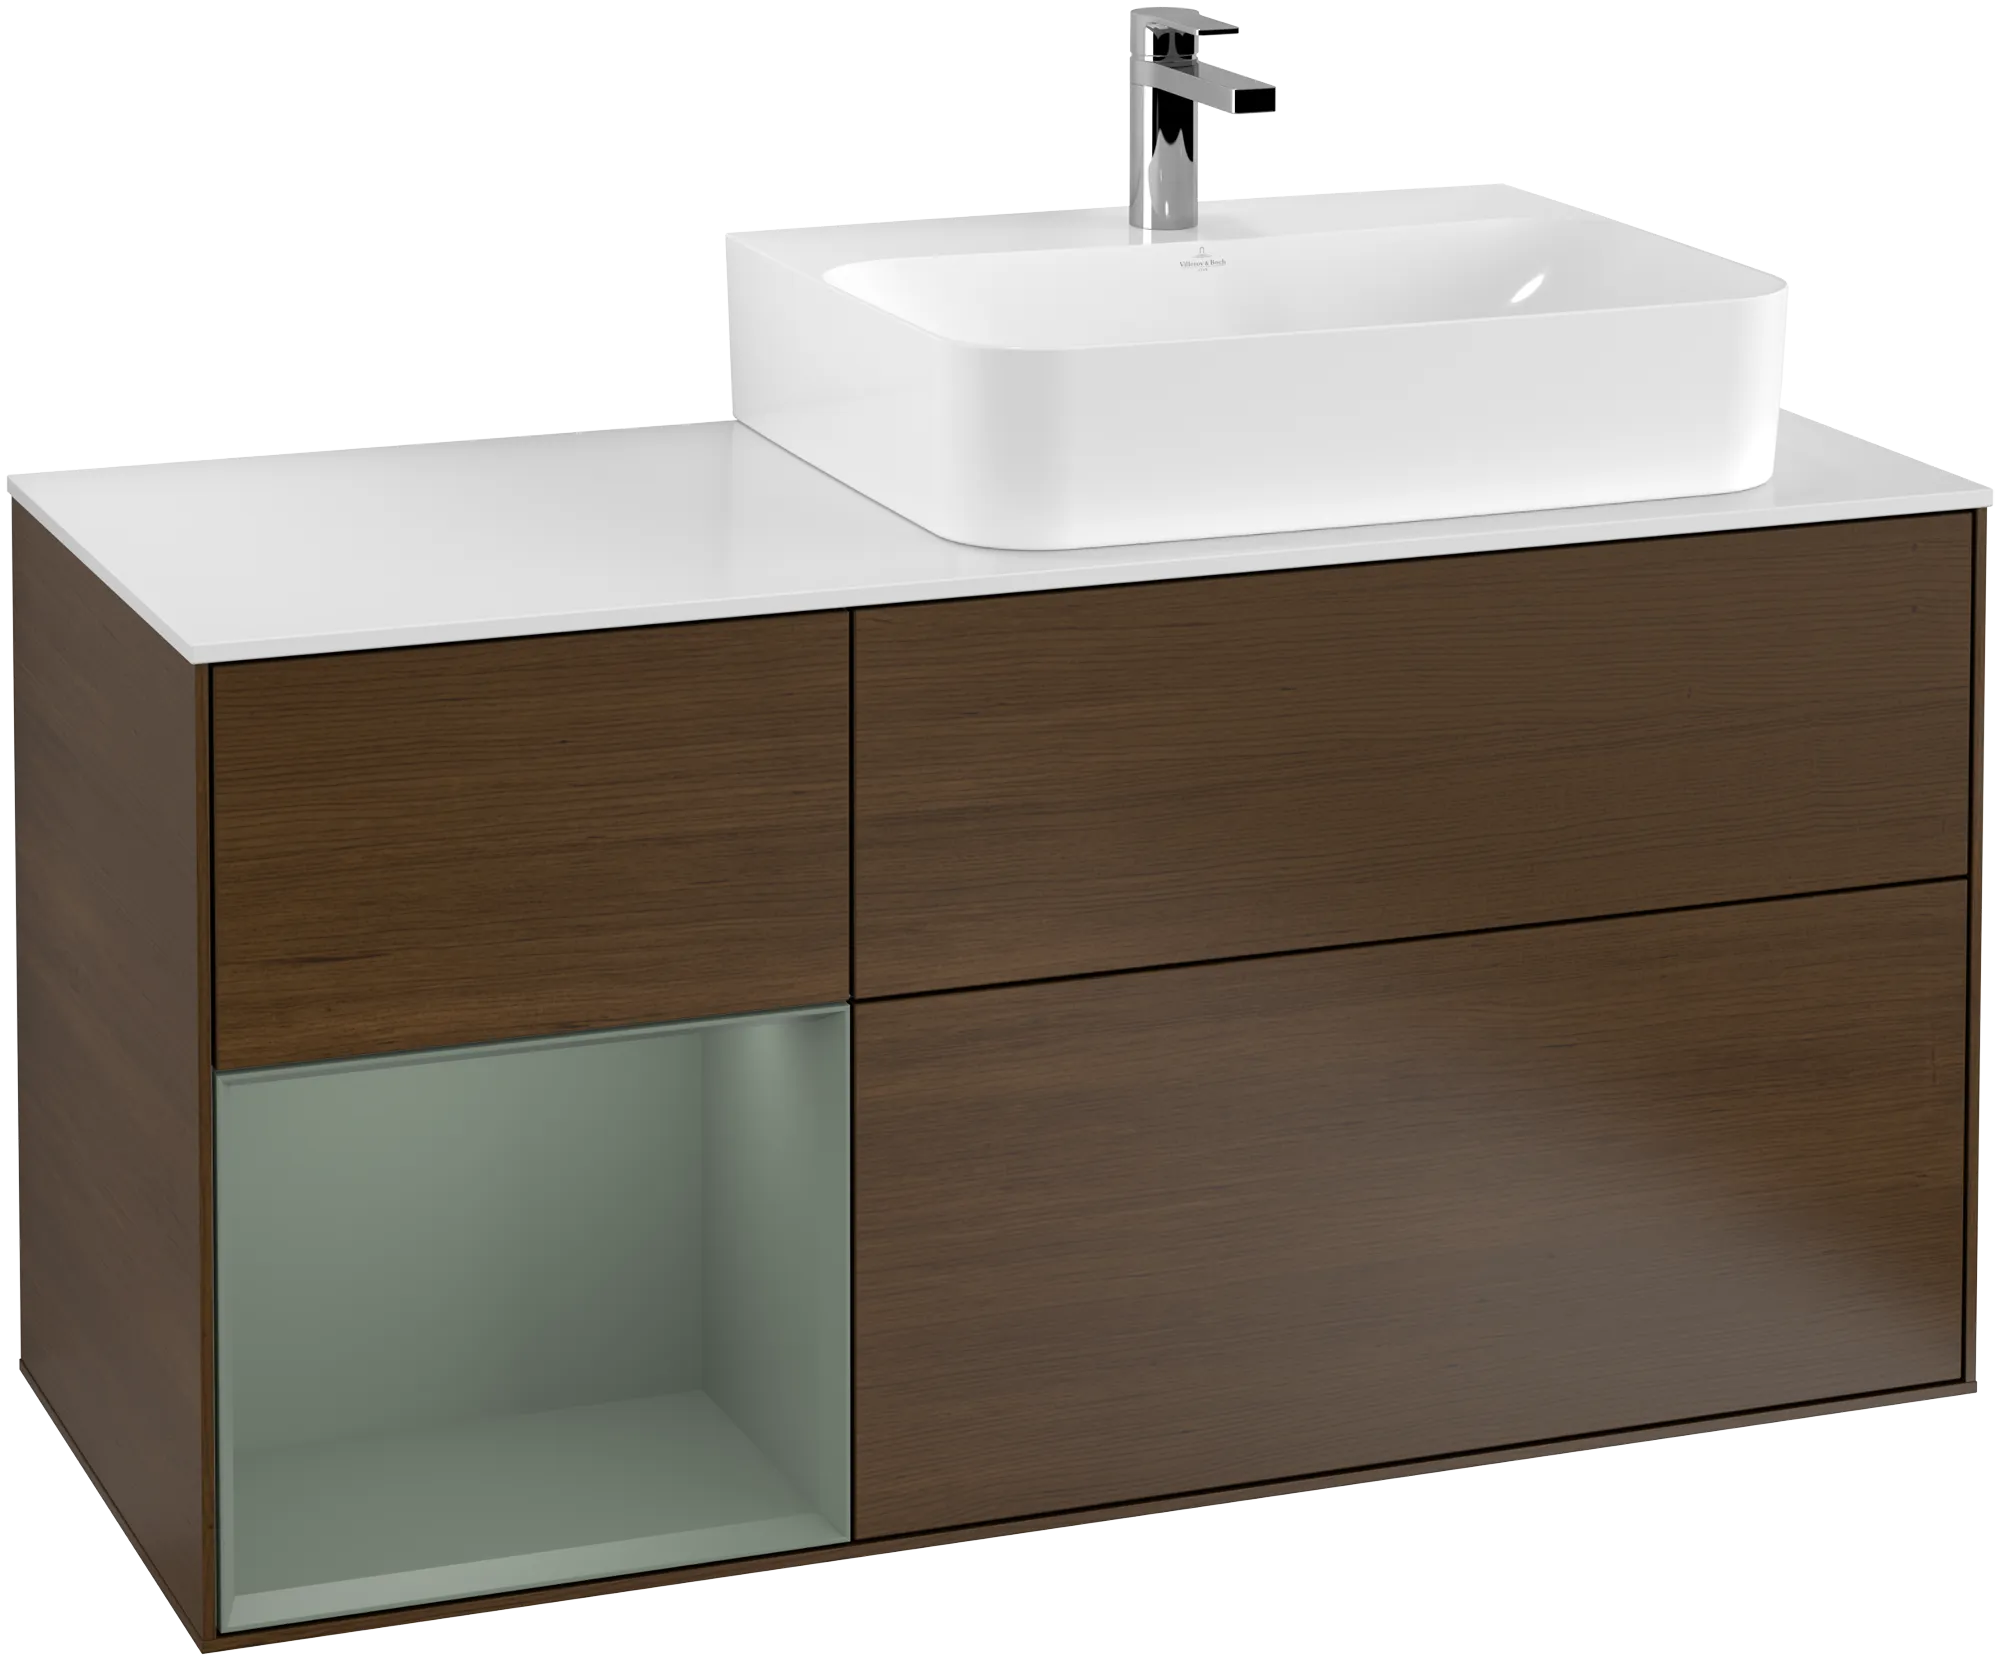 Picture of VILLEROY BOCH Finion Vanity unit, with lighting, 3 pull-out compartments, 1200 x 603 x 501 mm, Walnut Veneer / Olive Matt Lacquer / Glass White Matt #G141GMGN